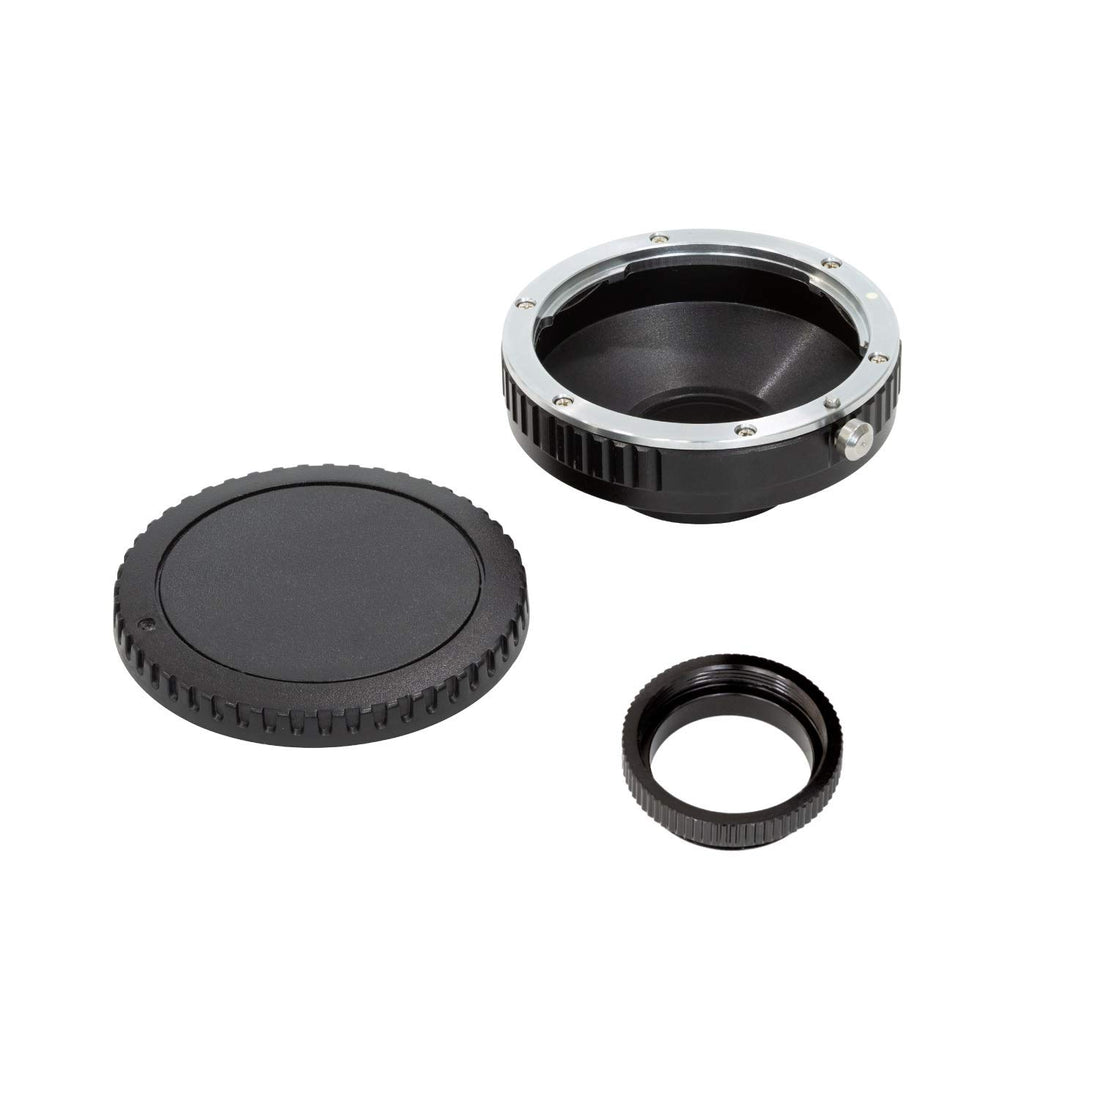 Arducam for Canon EOS Lens to C-Mount Lens Adapter, Compatiable with All EF, EF-S Lens to Raspberry Pi HQ Camera